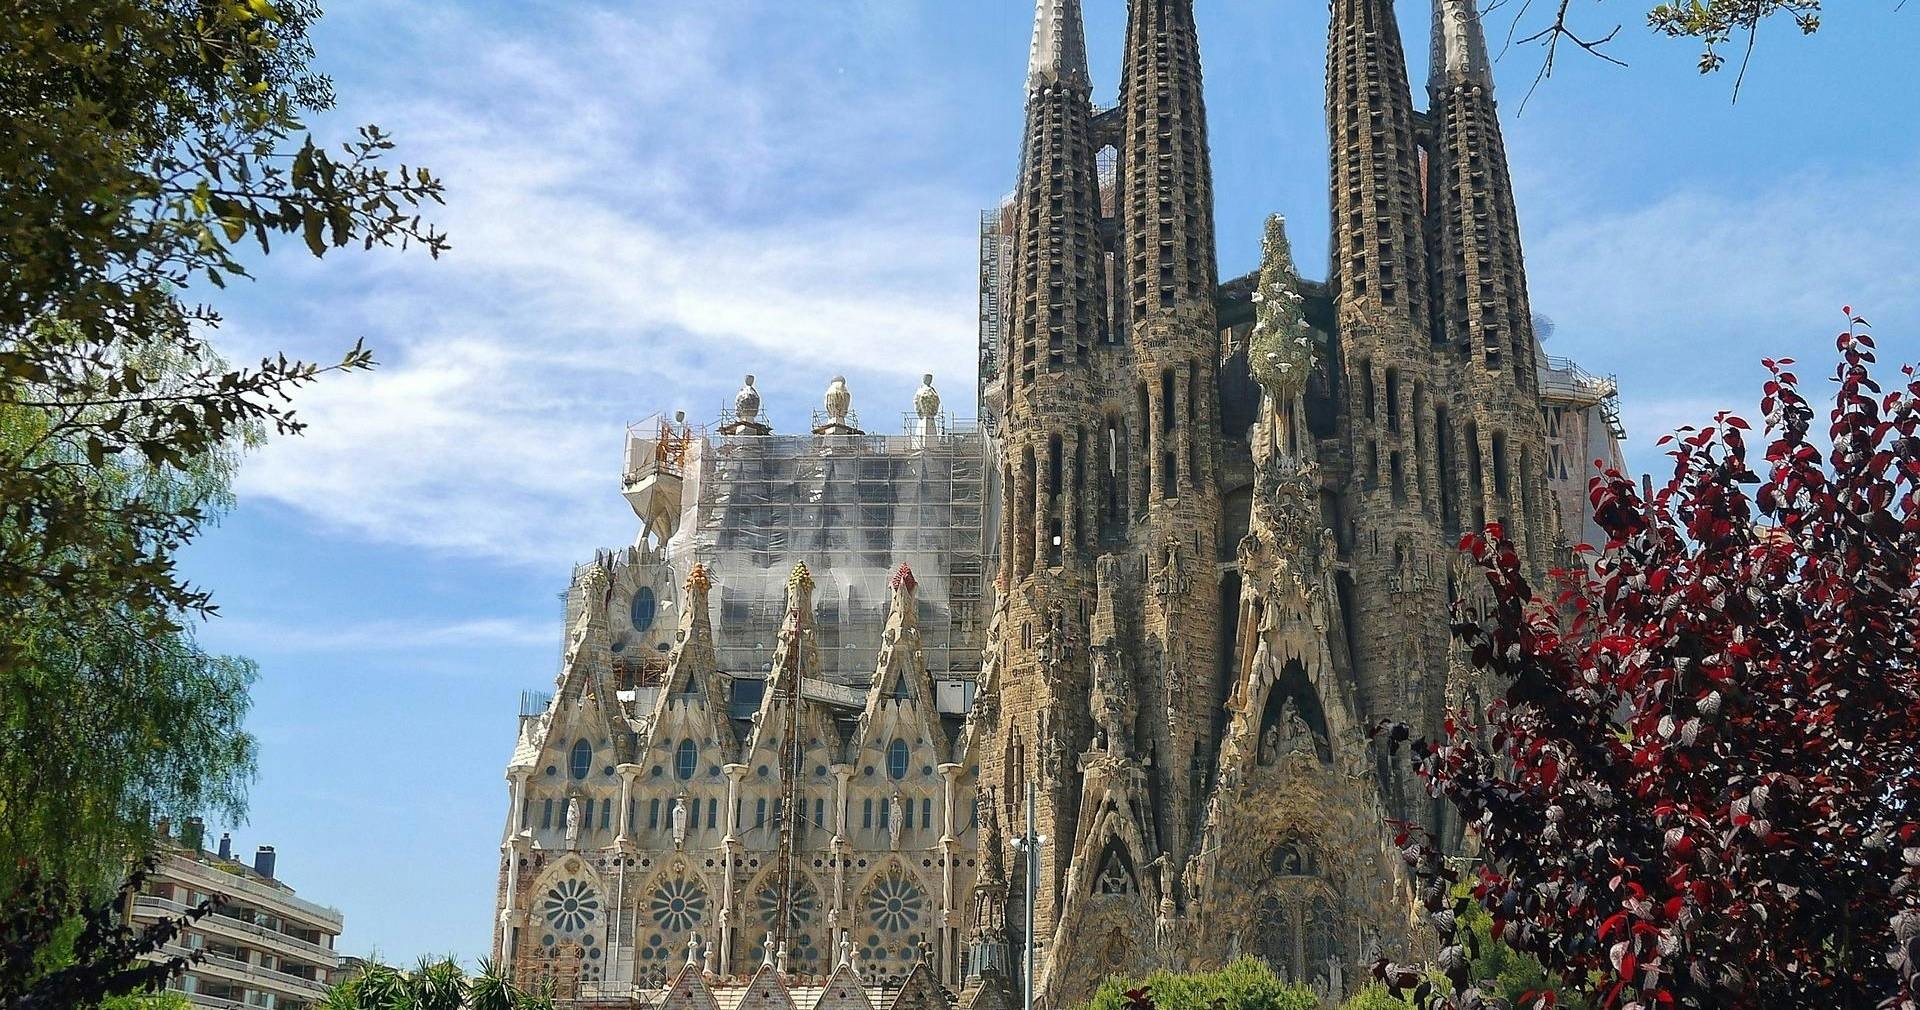 Sagrada Familia fast track ticket guided tour with tower access